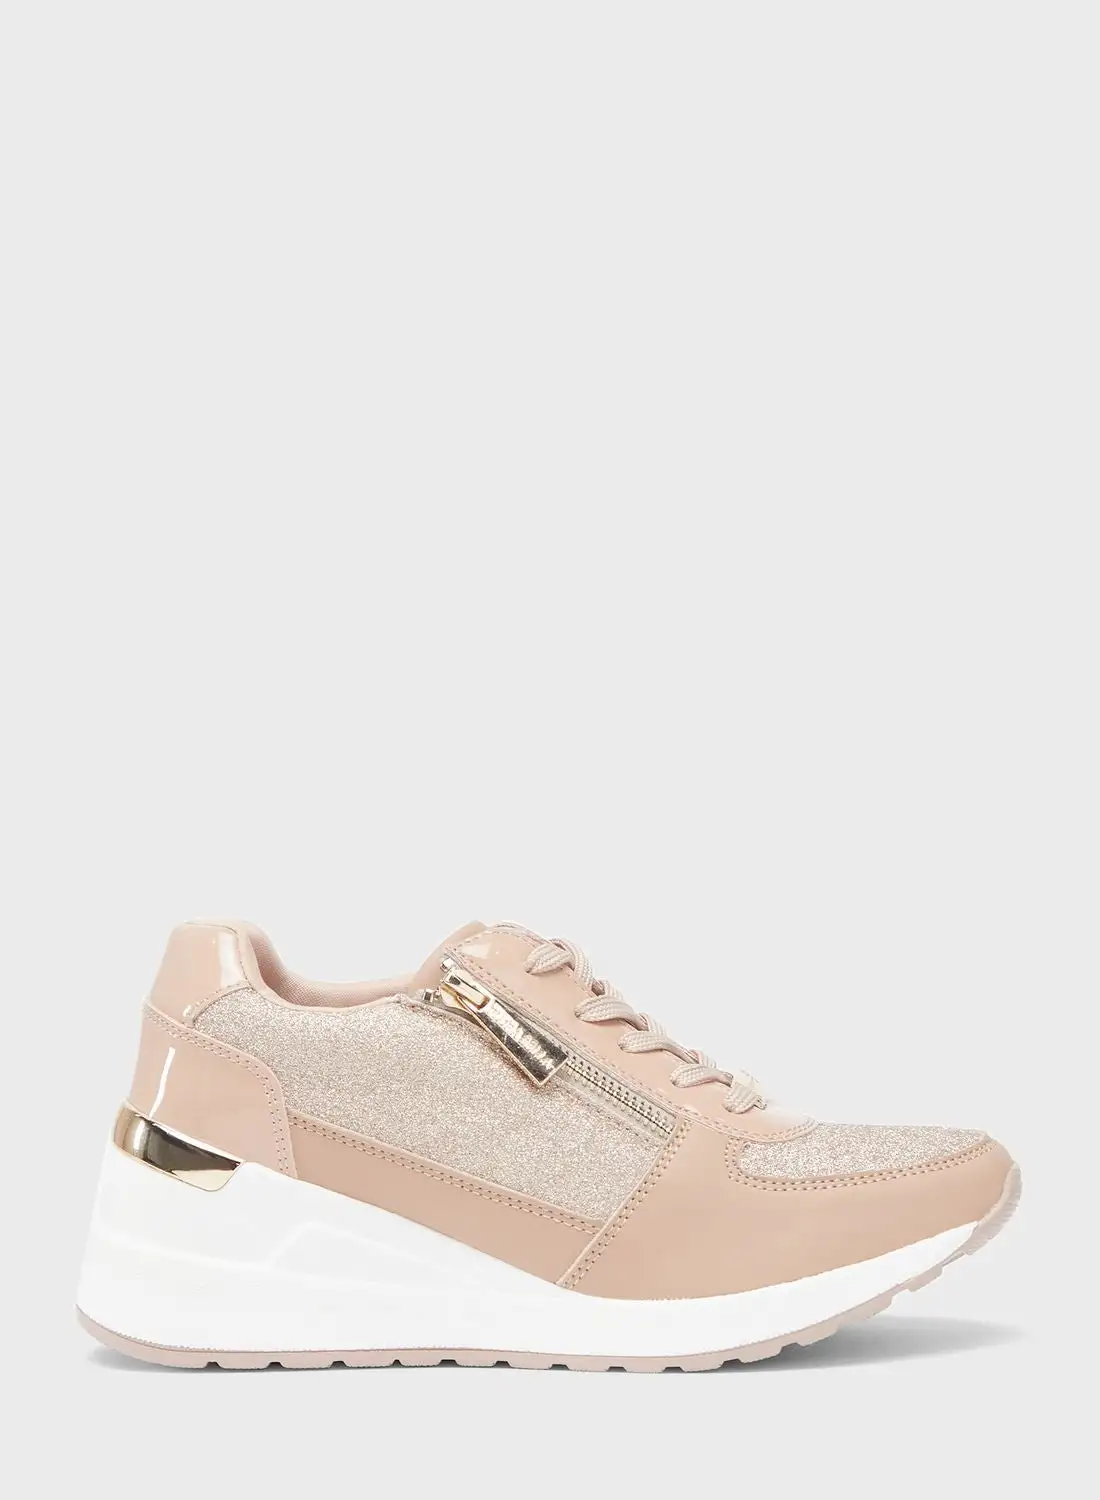 shoexpress Lace Up Low Top Sneakers